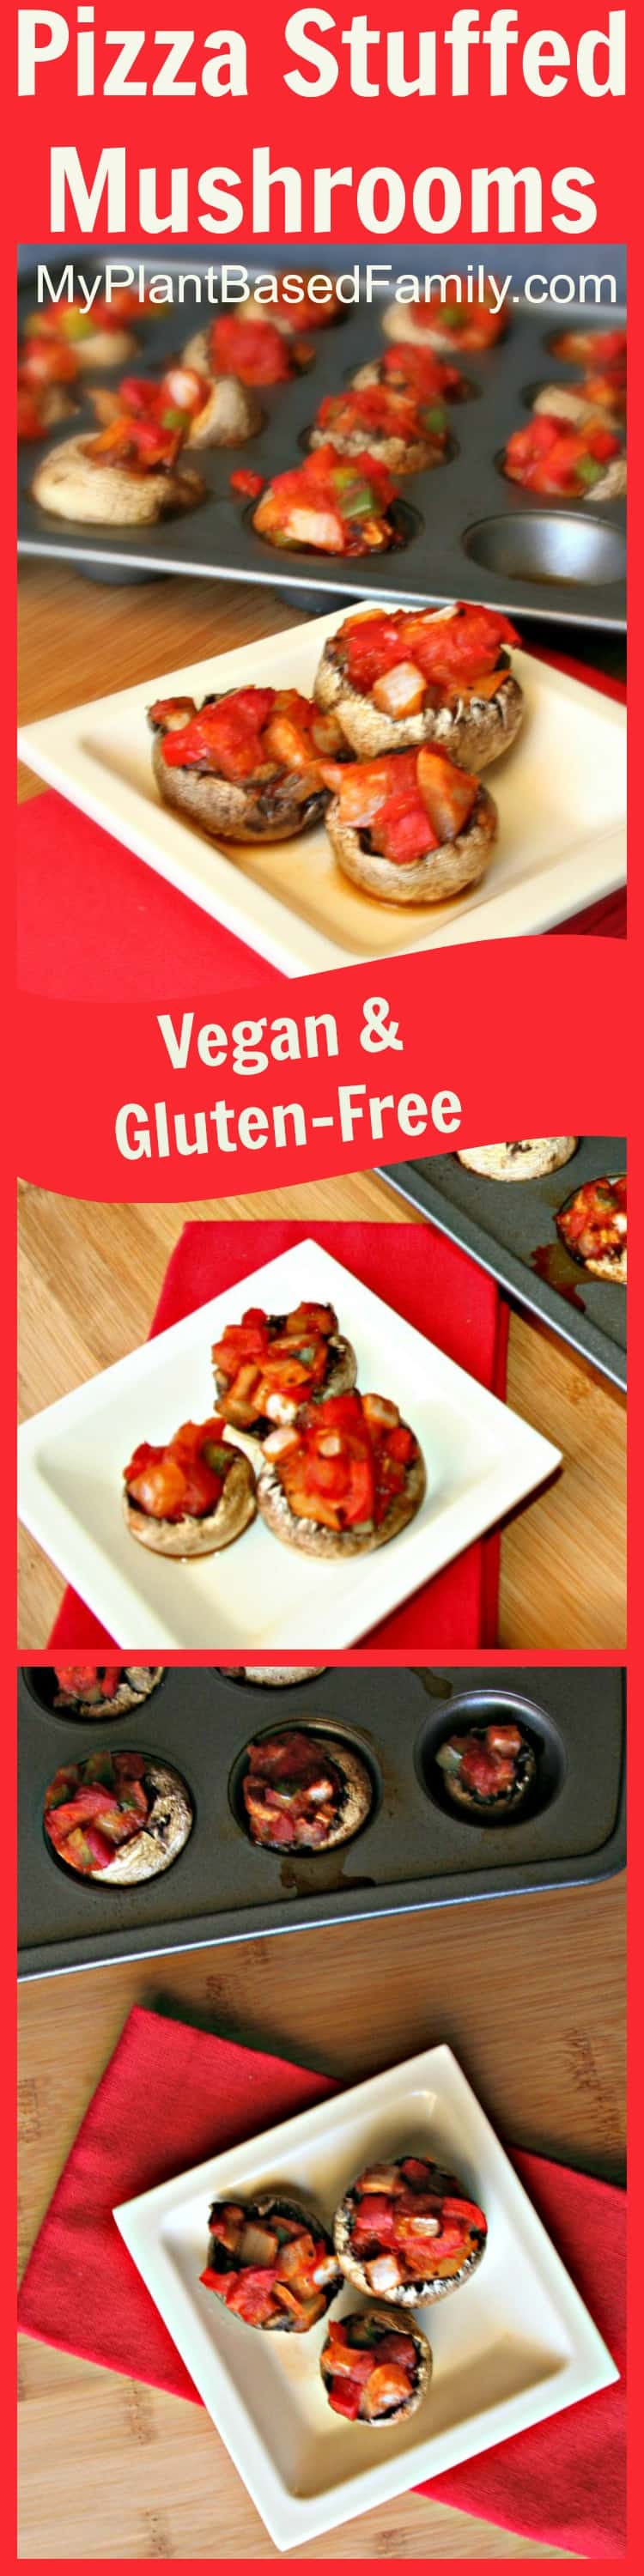 Pizza Stuffed Mushrooms are a great main, side or starter! Gluten-Free and vegan and can accommodate many food restrictions.